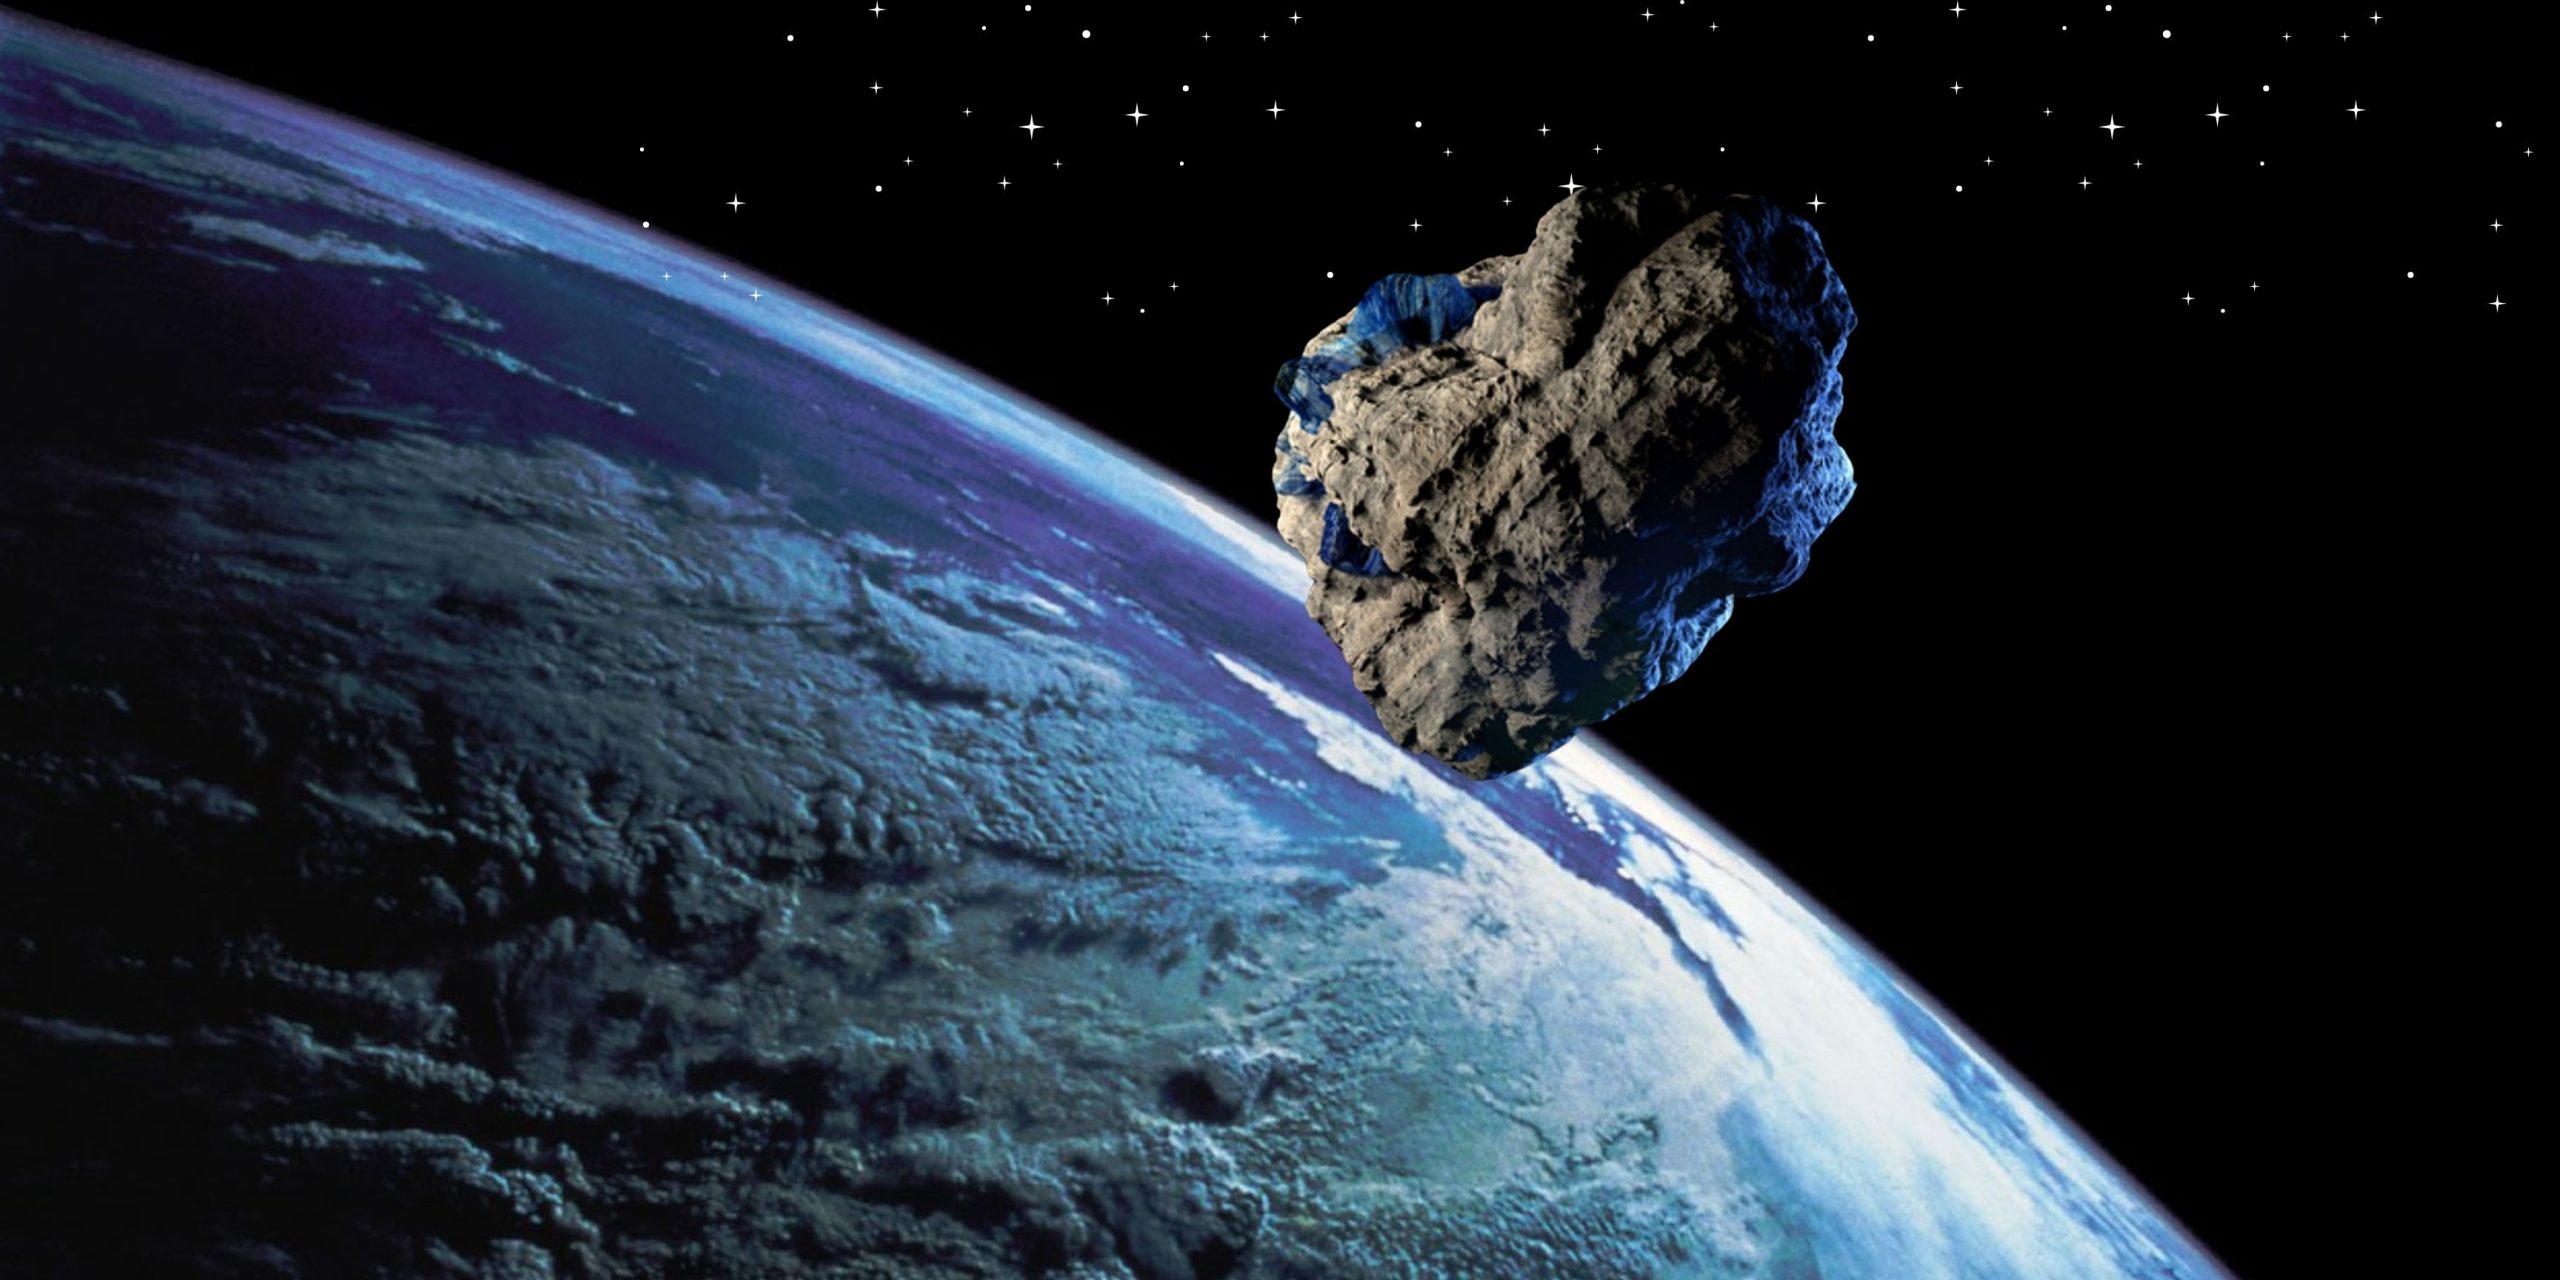 Skyscraper-Size Asteroid DZ2 To Fly By Earth On Saturday 